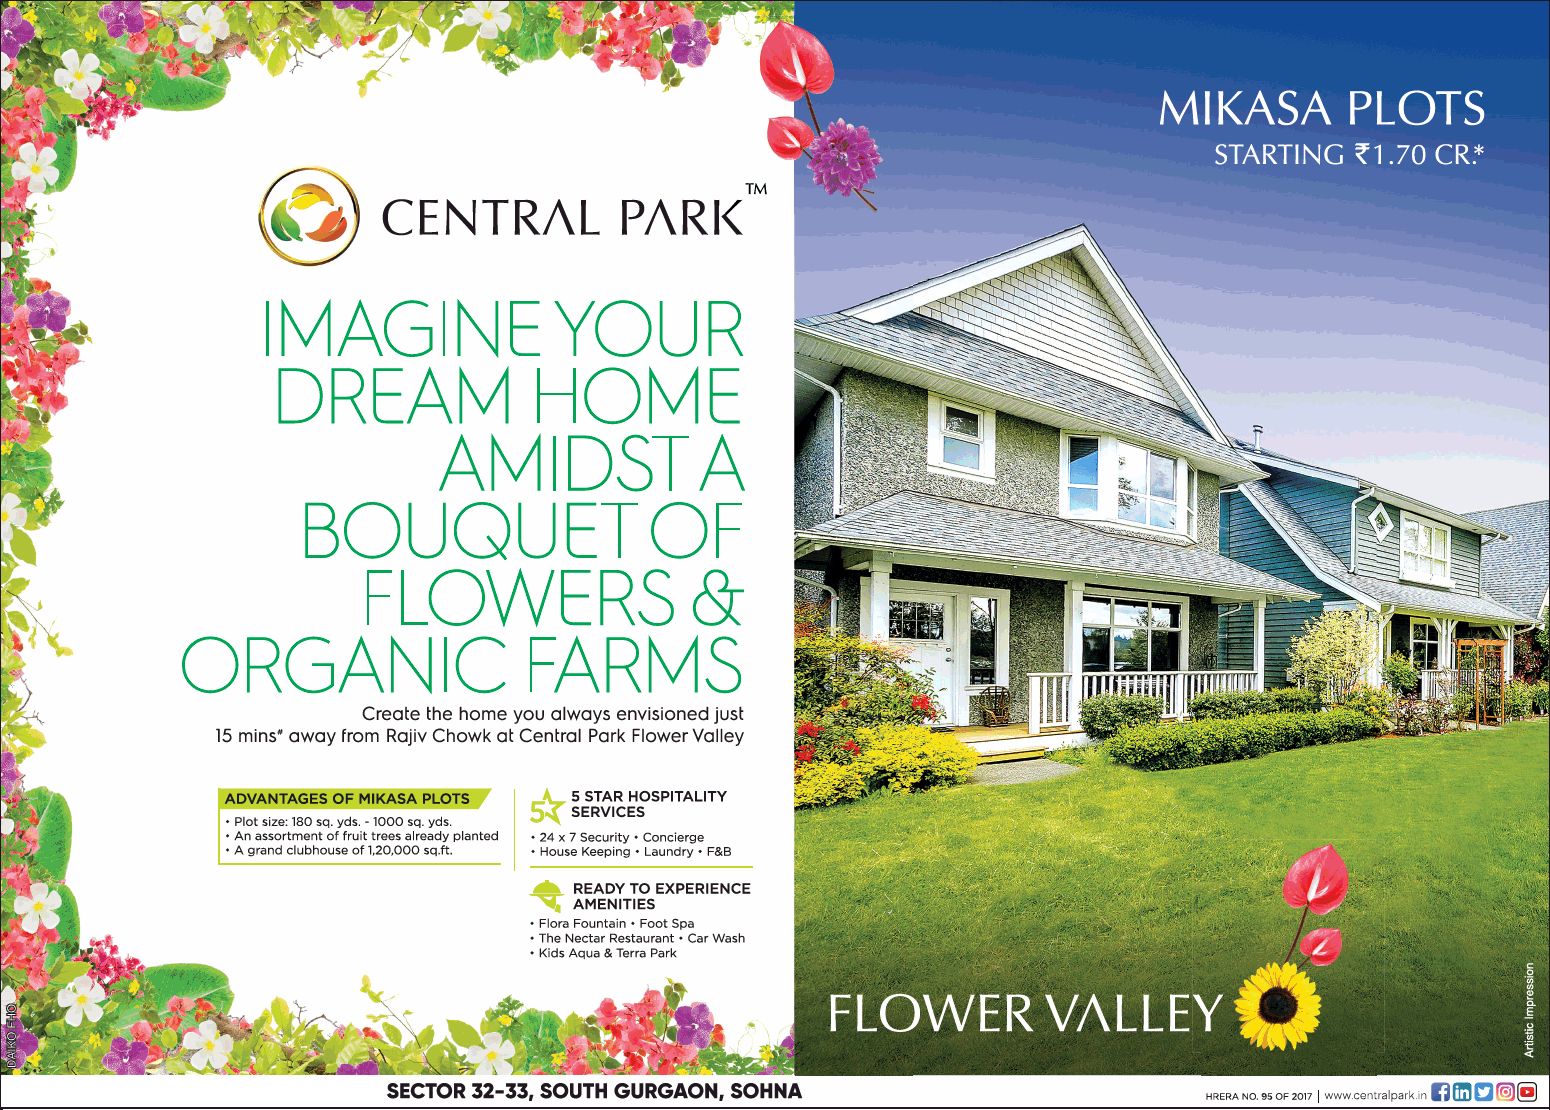 Ready to experience amenities at Central Park Flower Valley in Gurgaon